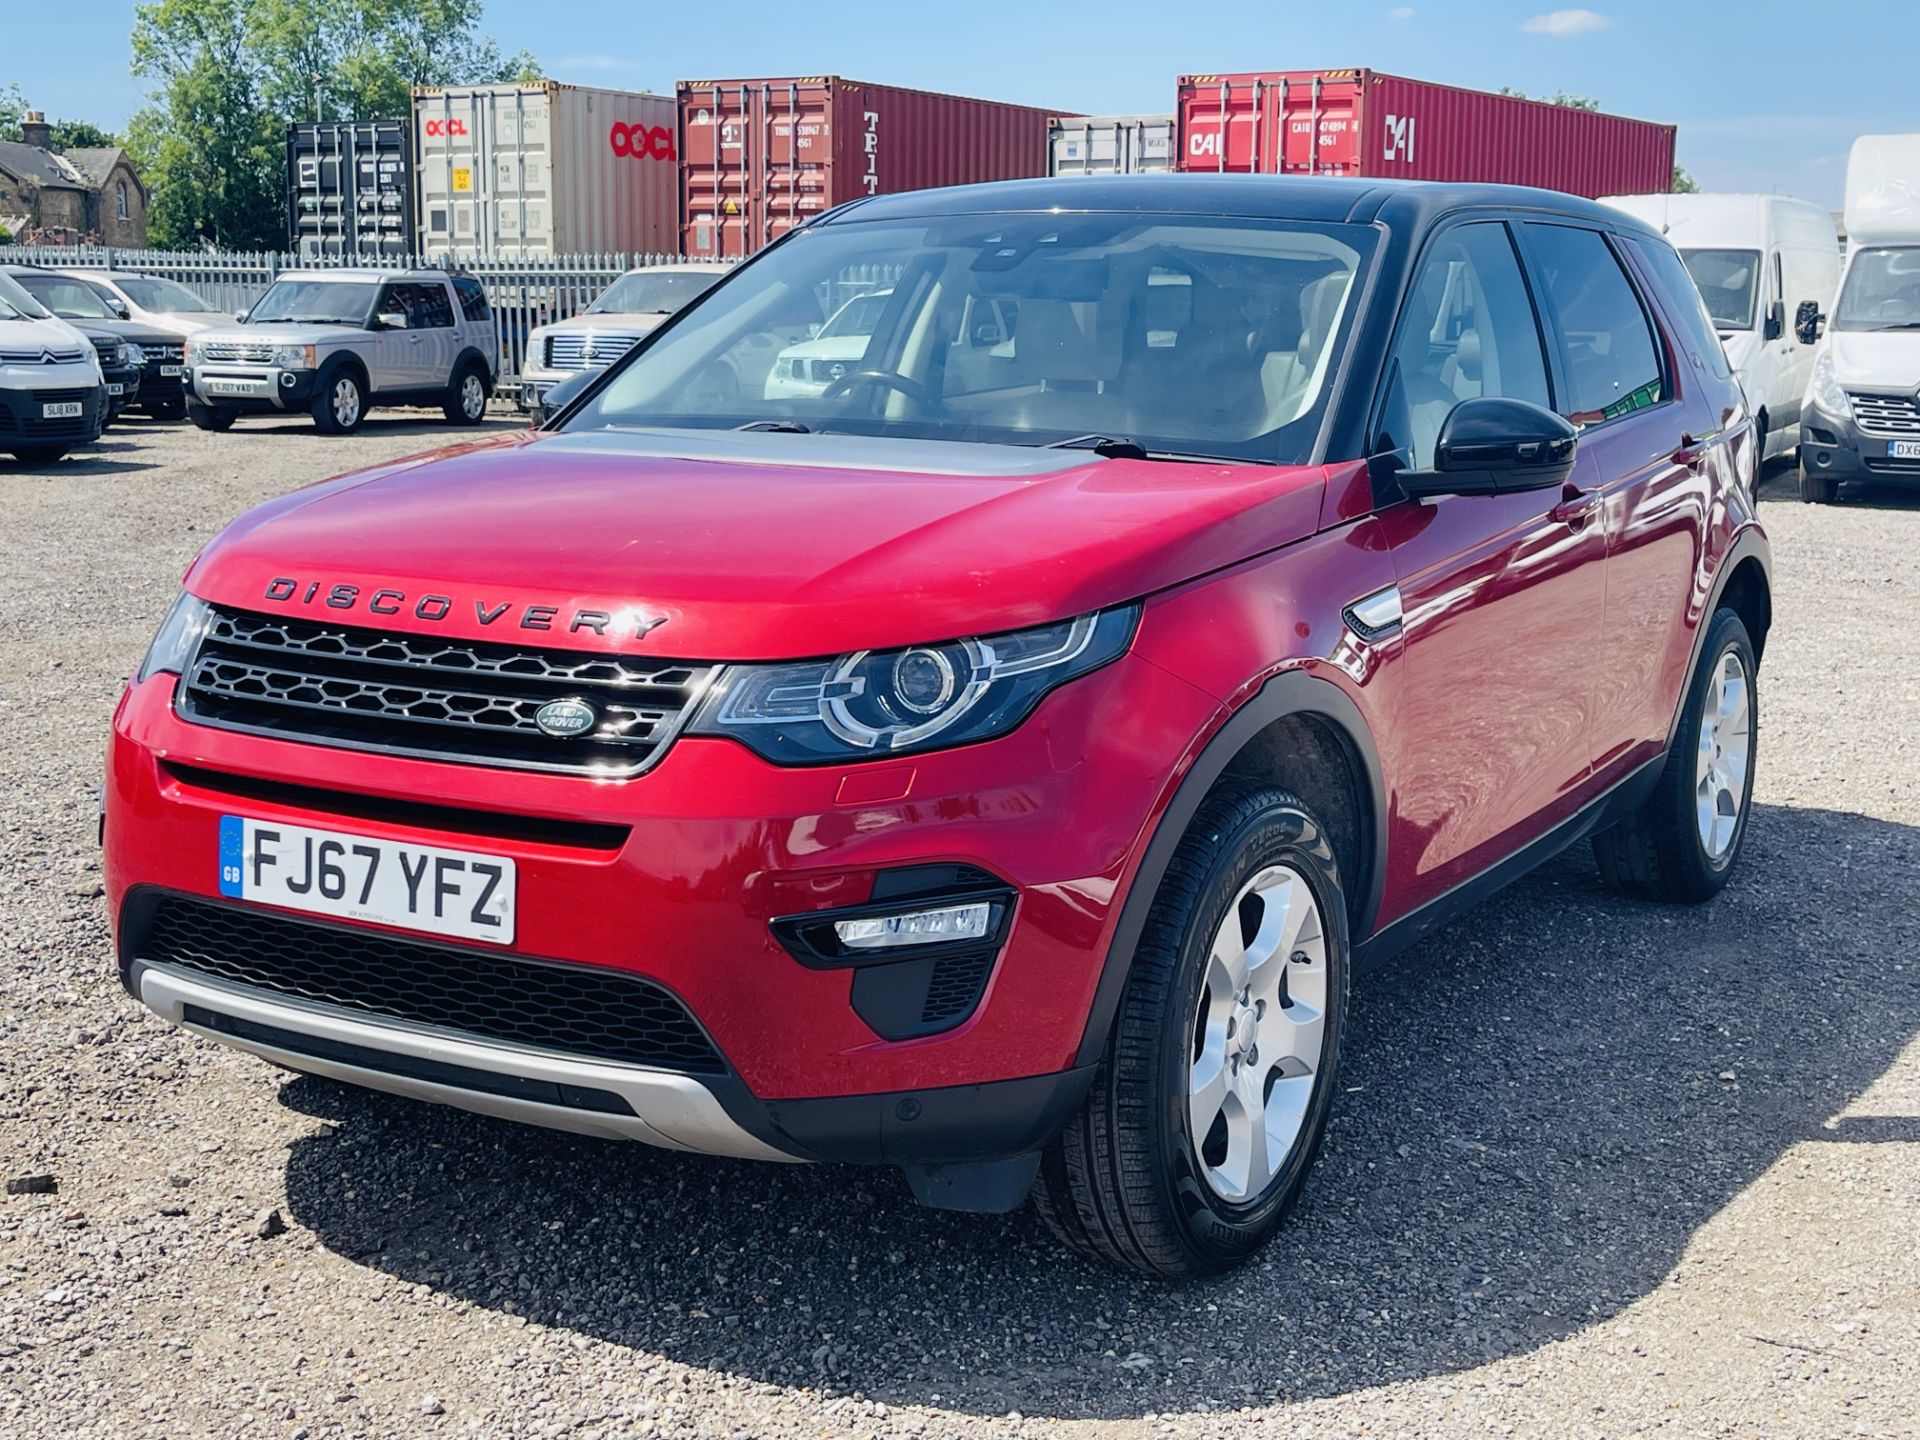 Land Rover Discovery Sport HSE 2.0 ED4 2017 '67 Reg' Sat Nav - Panoramic Glass Roof - ULEZ Compliant - Image 4 of 33